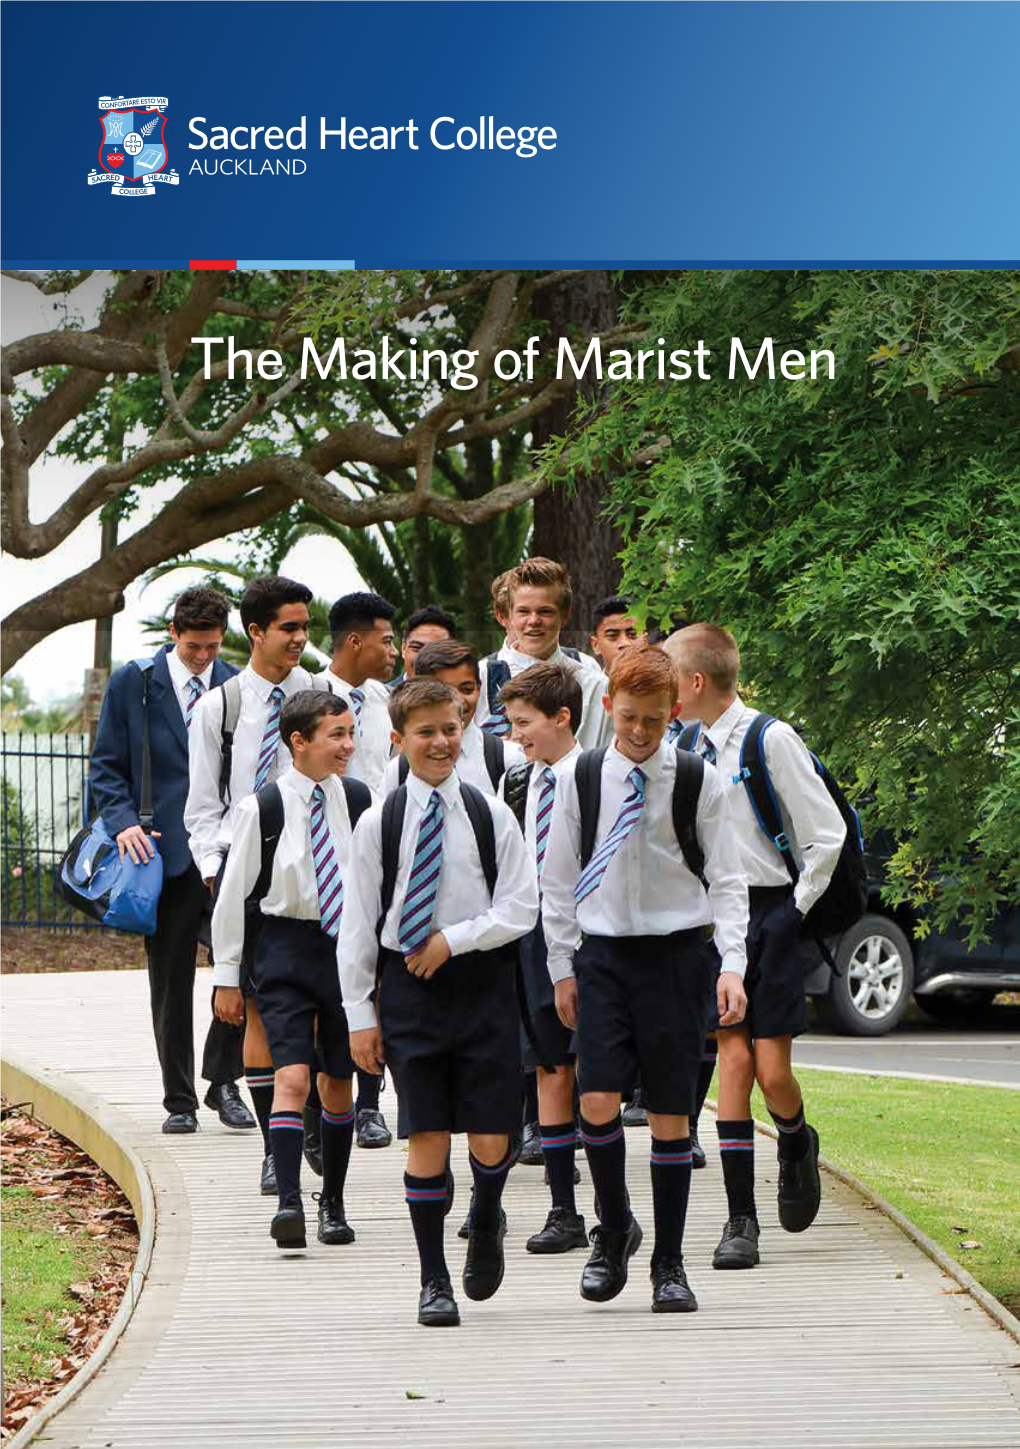 The Making of Marist Men Welcome to Sacred Heart College